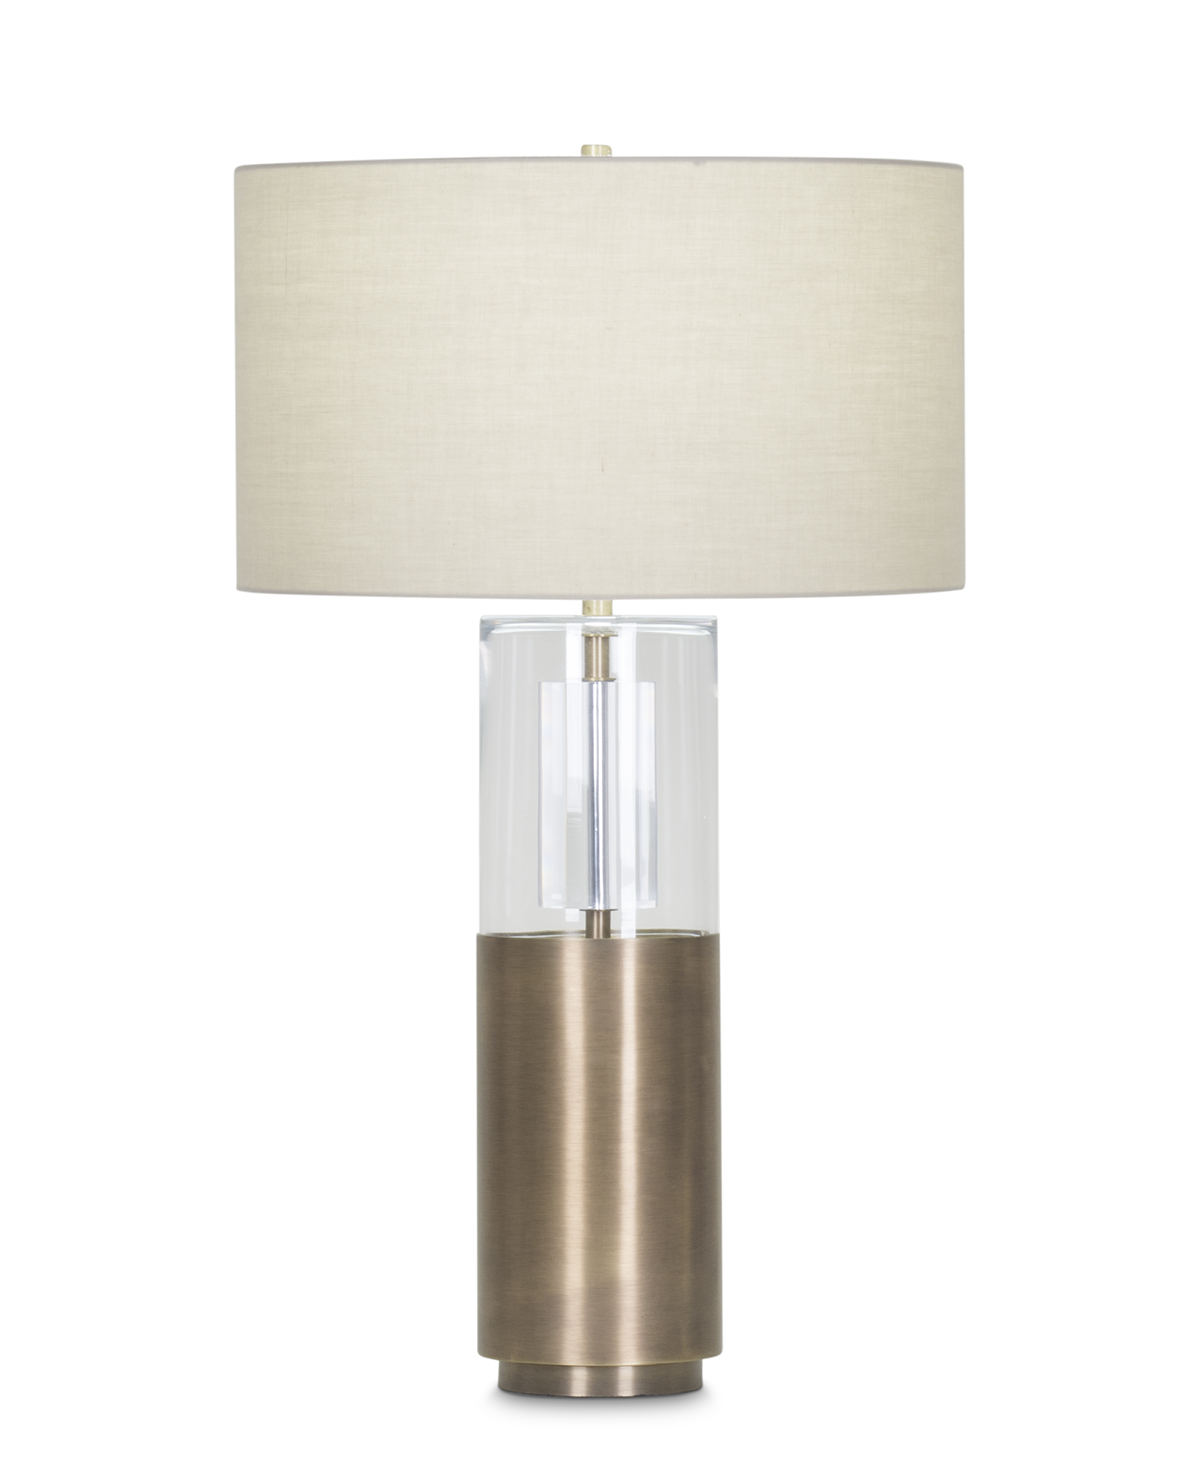 FlowDecor Riley Table Lamp in metal with antique brass finish and beige cotton drum shade (# 3960)